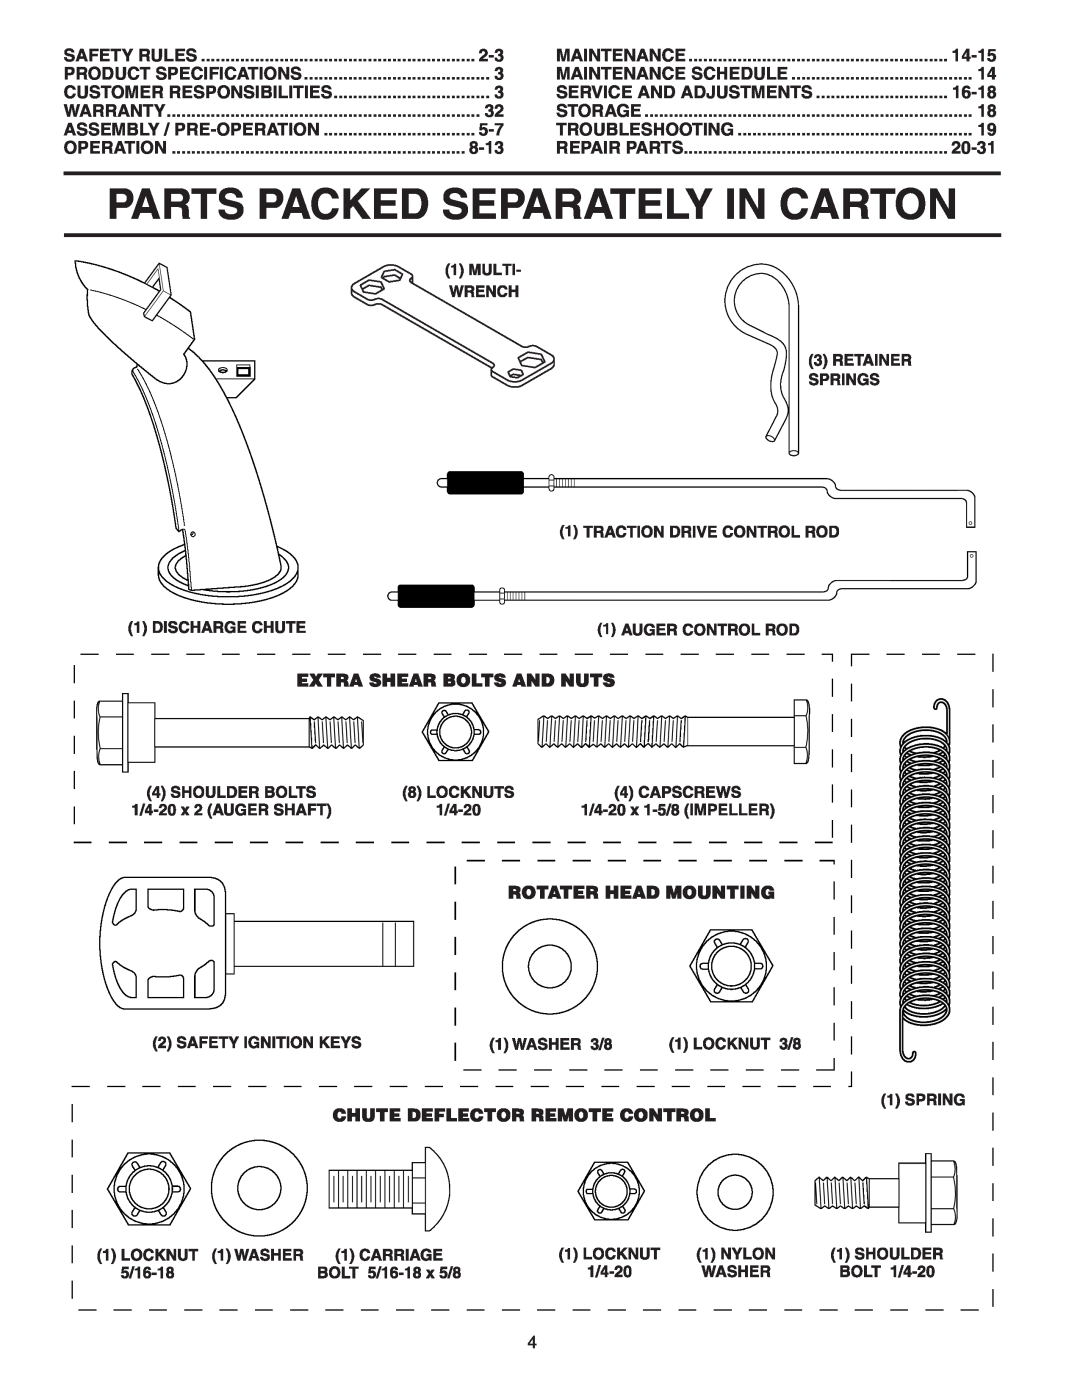 Poulan PP1130ESB Parts Packed Separately In Carton, 8-13, 14-15, Service And Adjustments, 16-18, 20-31, Safety Rules 